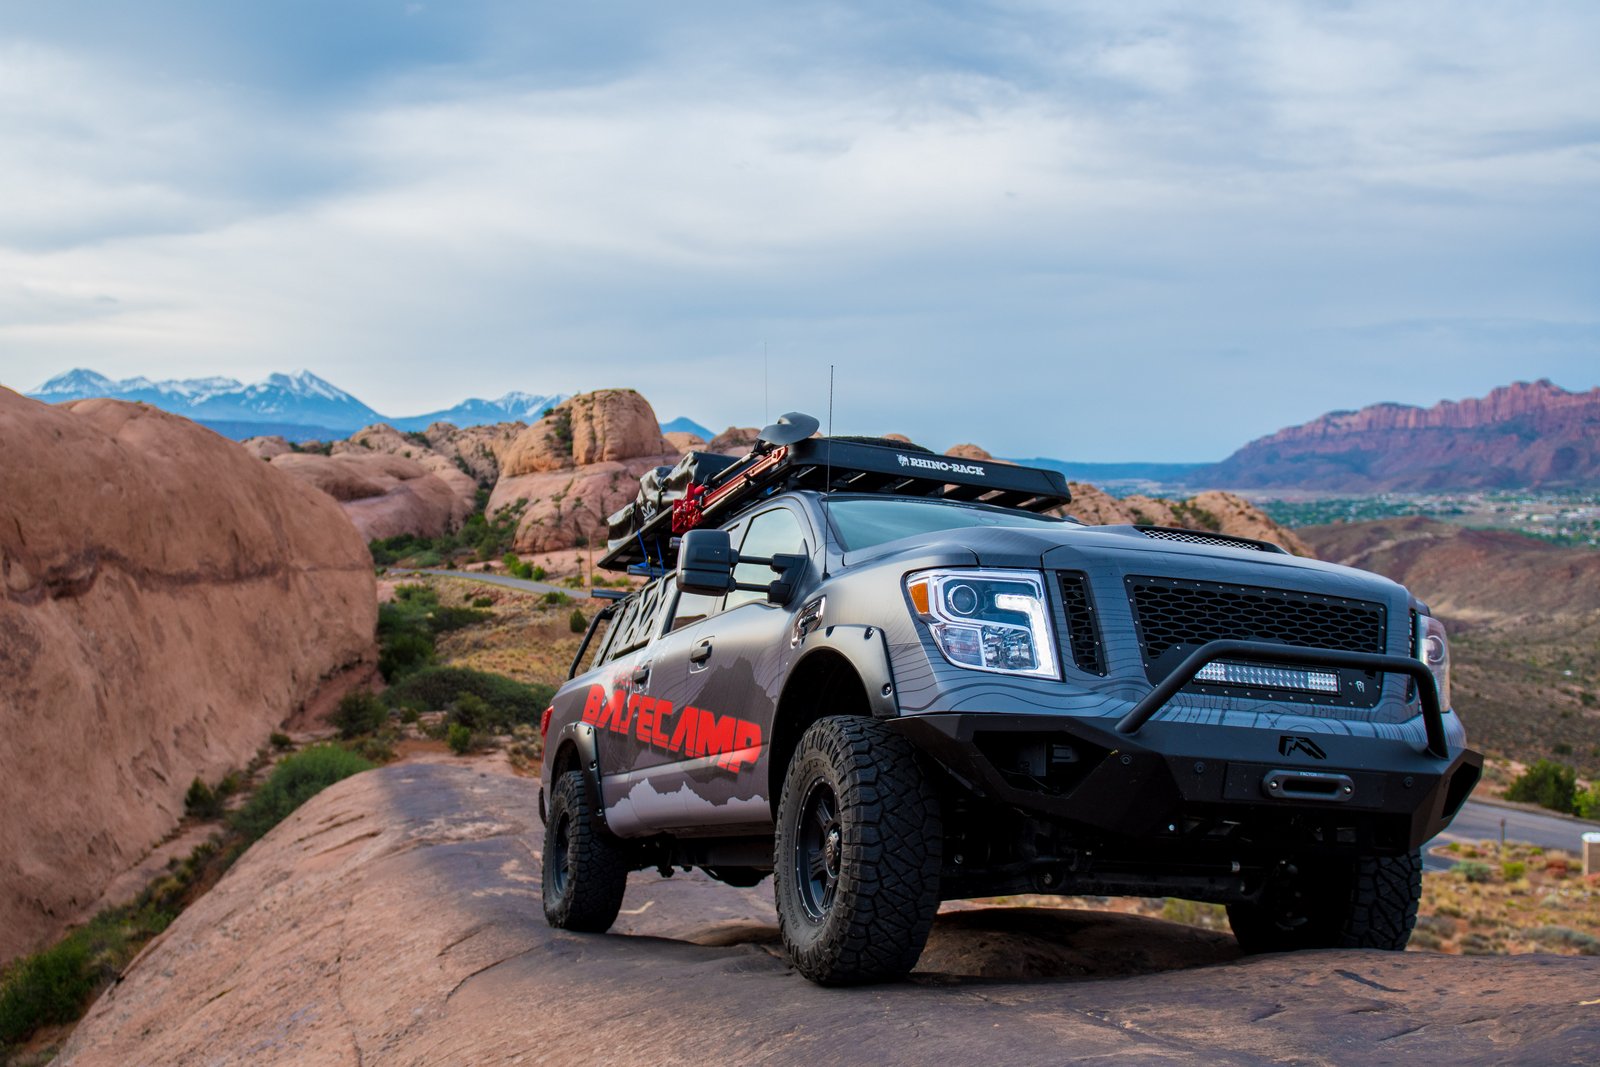 The Nissan TITAN XD PRO-4X Project Basecamp, designed for self-sustaining exploration of backcountry, is capable of taking on any climate or terrain in its path. It’s built on the foundation of a rugged Nissan TITAN XD PRO-4X, anchored by a powerful Cummins® 5.0L V8 Turbo Diesel rated at 310 horsepower and a hefty 555 lb-ft of torque. Key modifications include 3-inch lift kit, bed cage, stargazer tent, light bar and 35-inch tires.